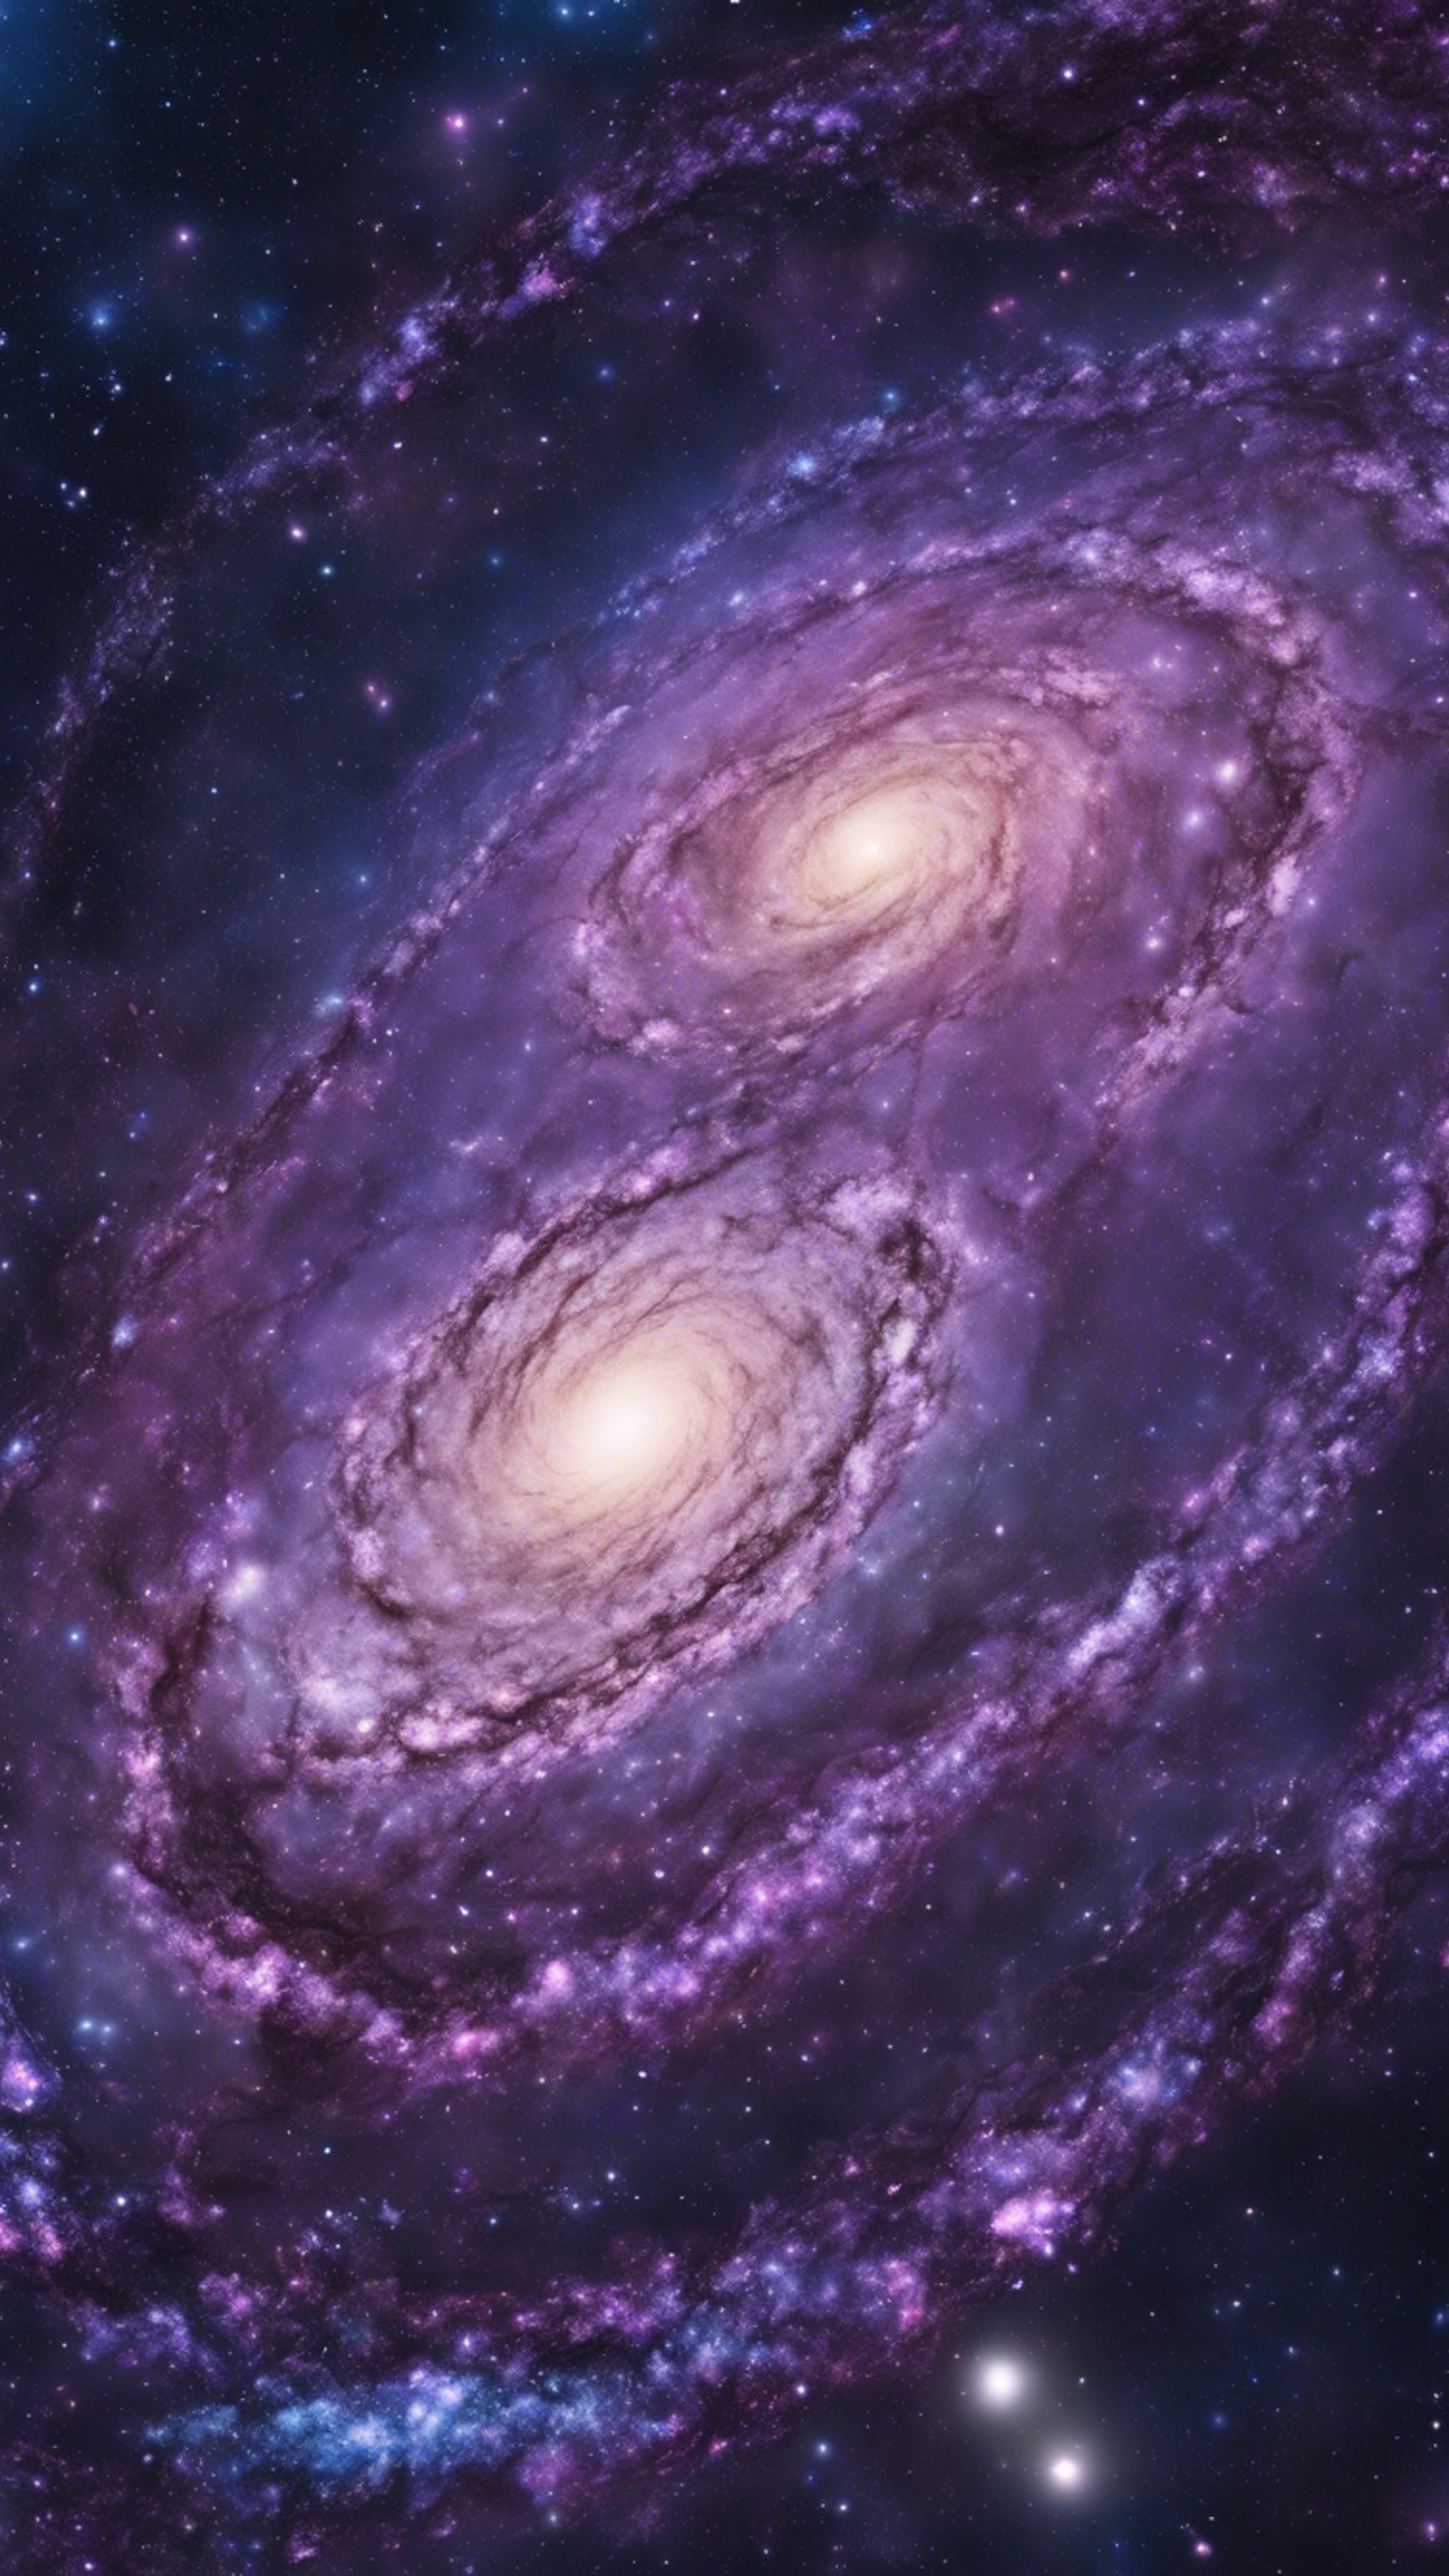 A spectacular galaxy with swirling patterns of purples and blues. 墙纸[e57f5ee32b94469cbfb9]